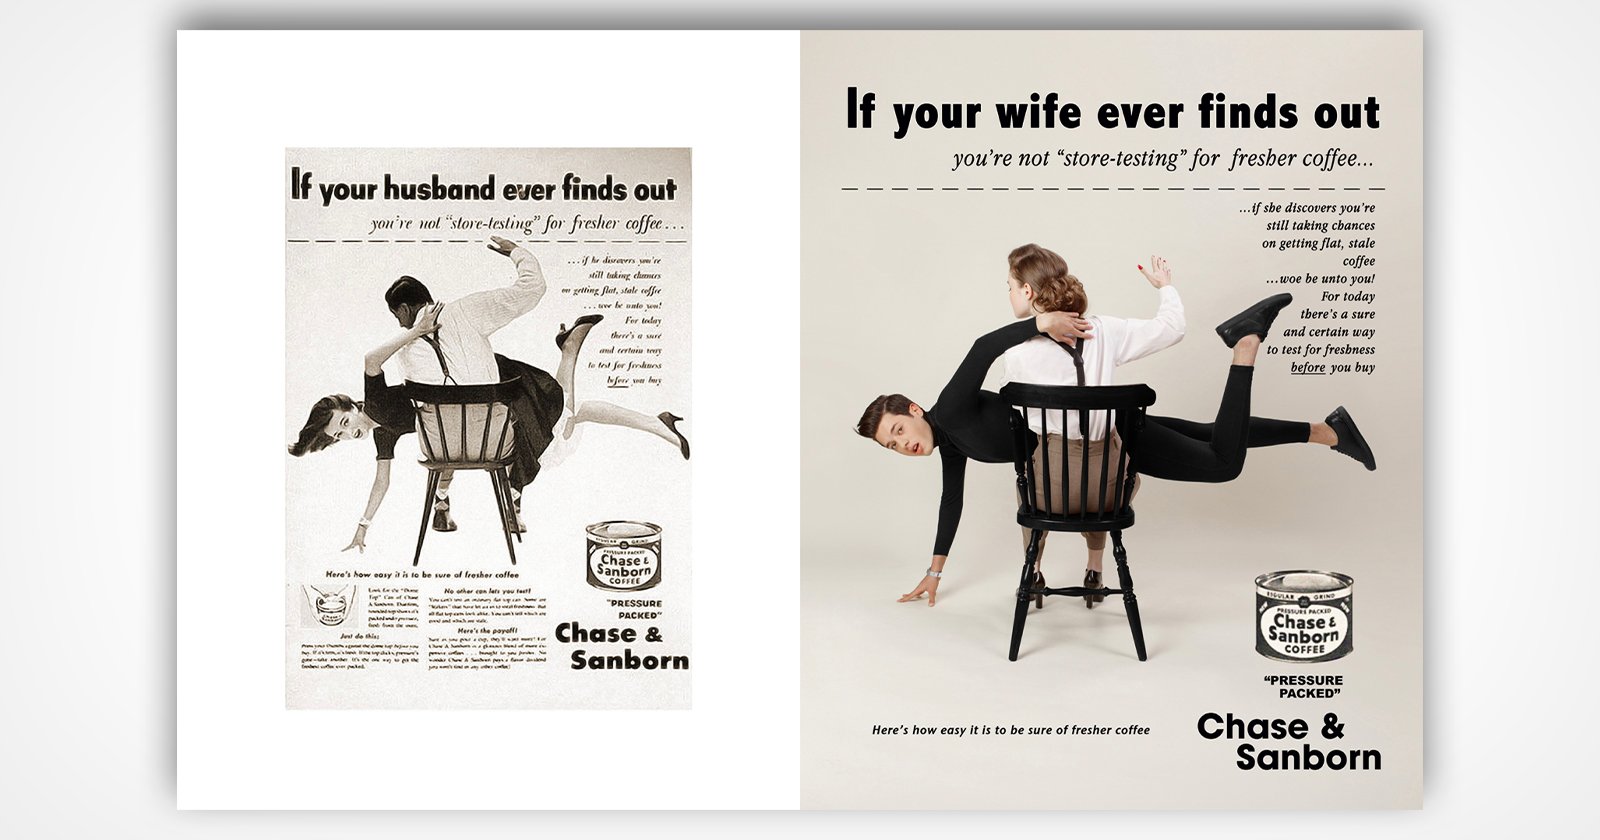 Role-Reversal Photo Series Challenges Traditional Gender Stereotypes |  Petapixel